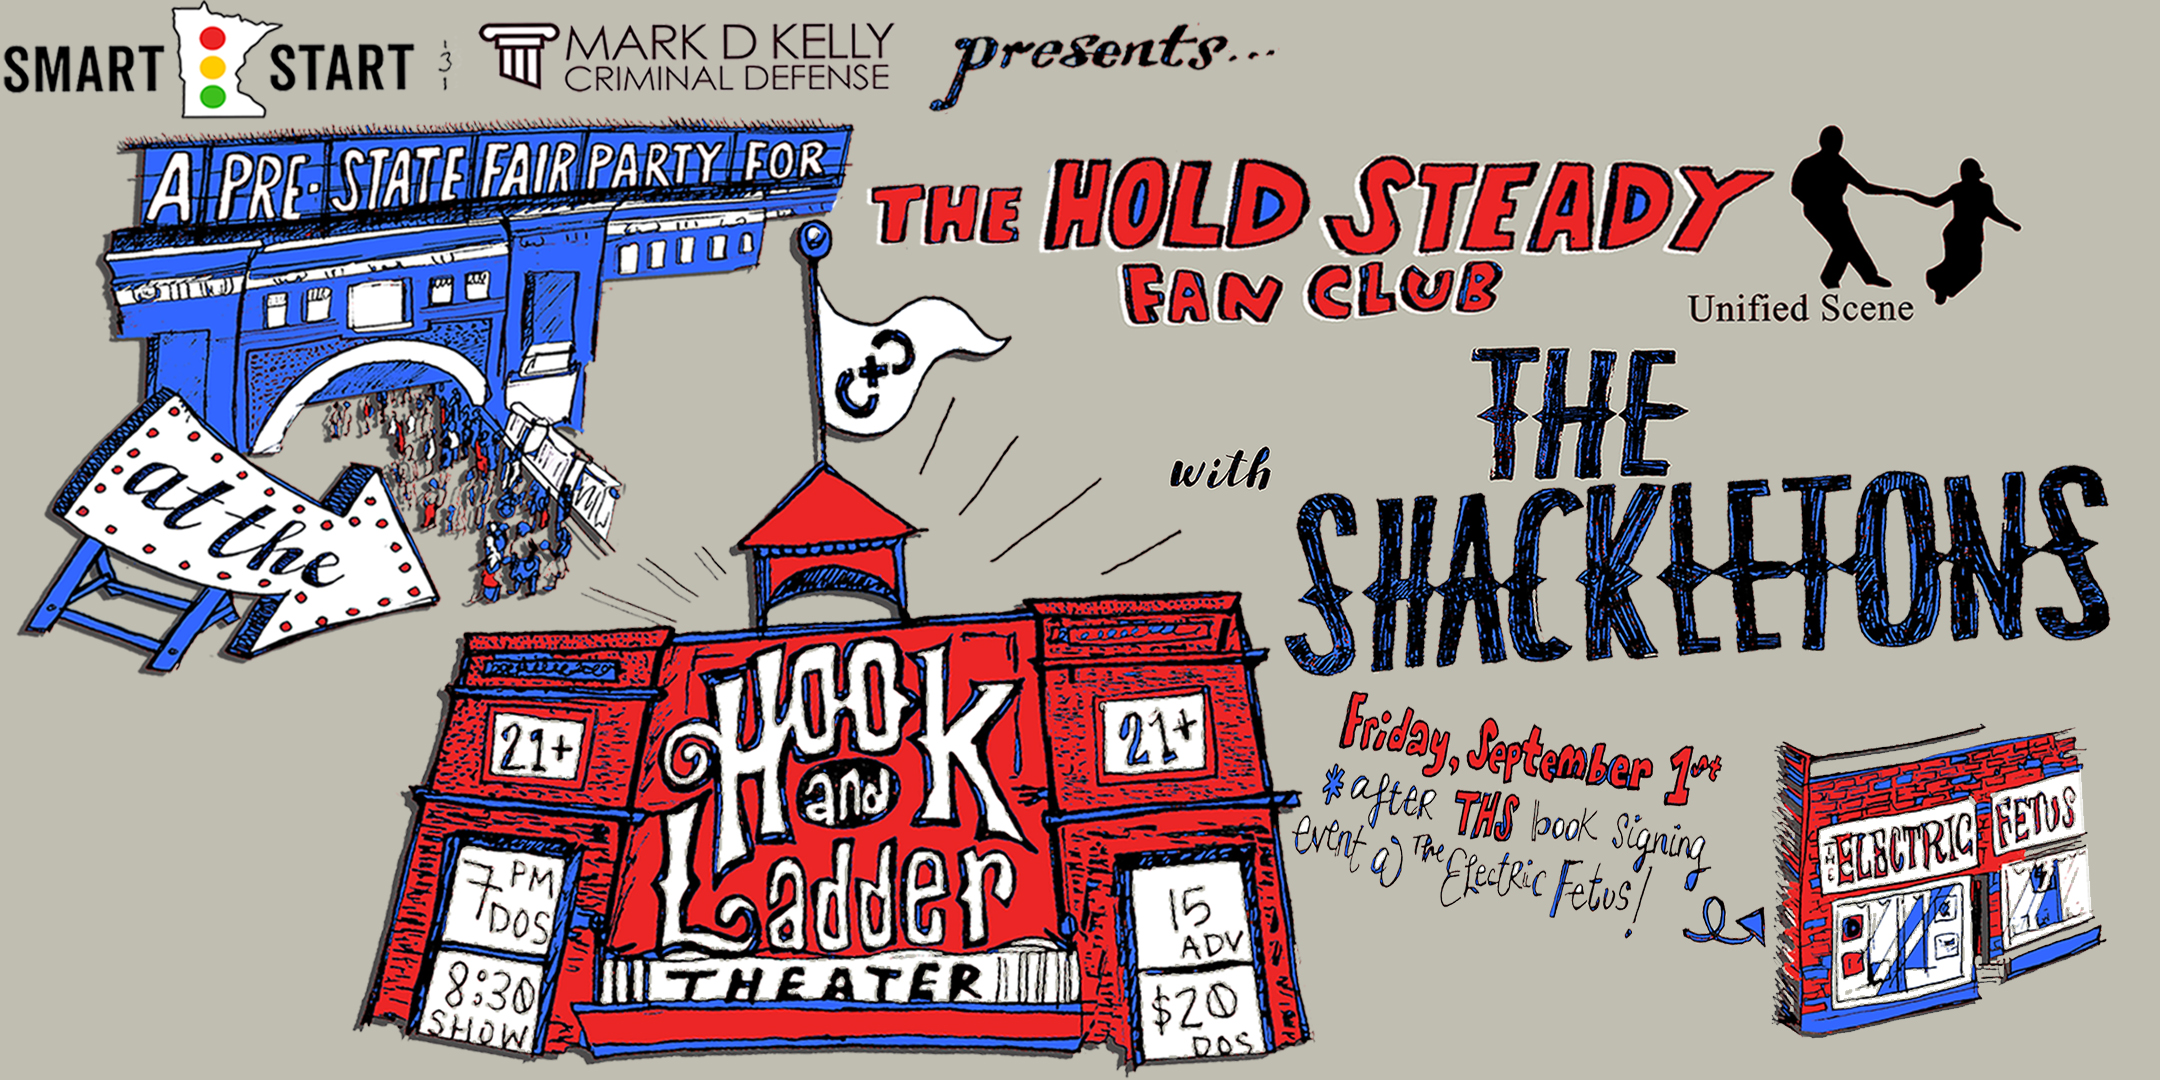 Smart Start MN & Mark D. Kelly Criminal Defense LLC presents A Pre-State Fair Party for The Hold Steady Fan Club! An Evening with The Shackletons Friday, September 1, 2023 The Hook and Ladder Theater Doors 7:00pm :: Music 8:30pm :: 21+ General Admission*: $15 ADV / $20 DOS * Does not include fees NO REFUNDS